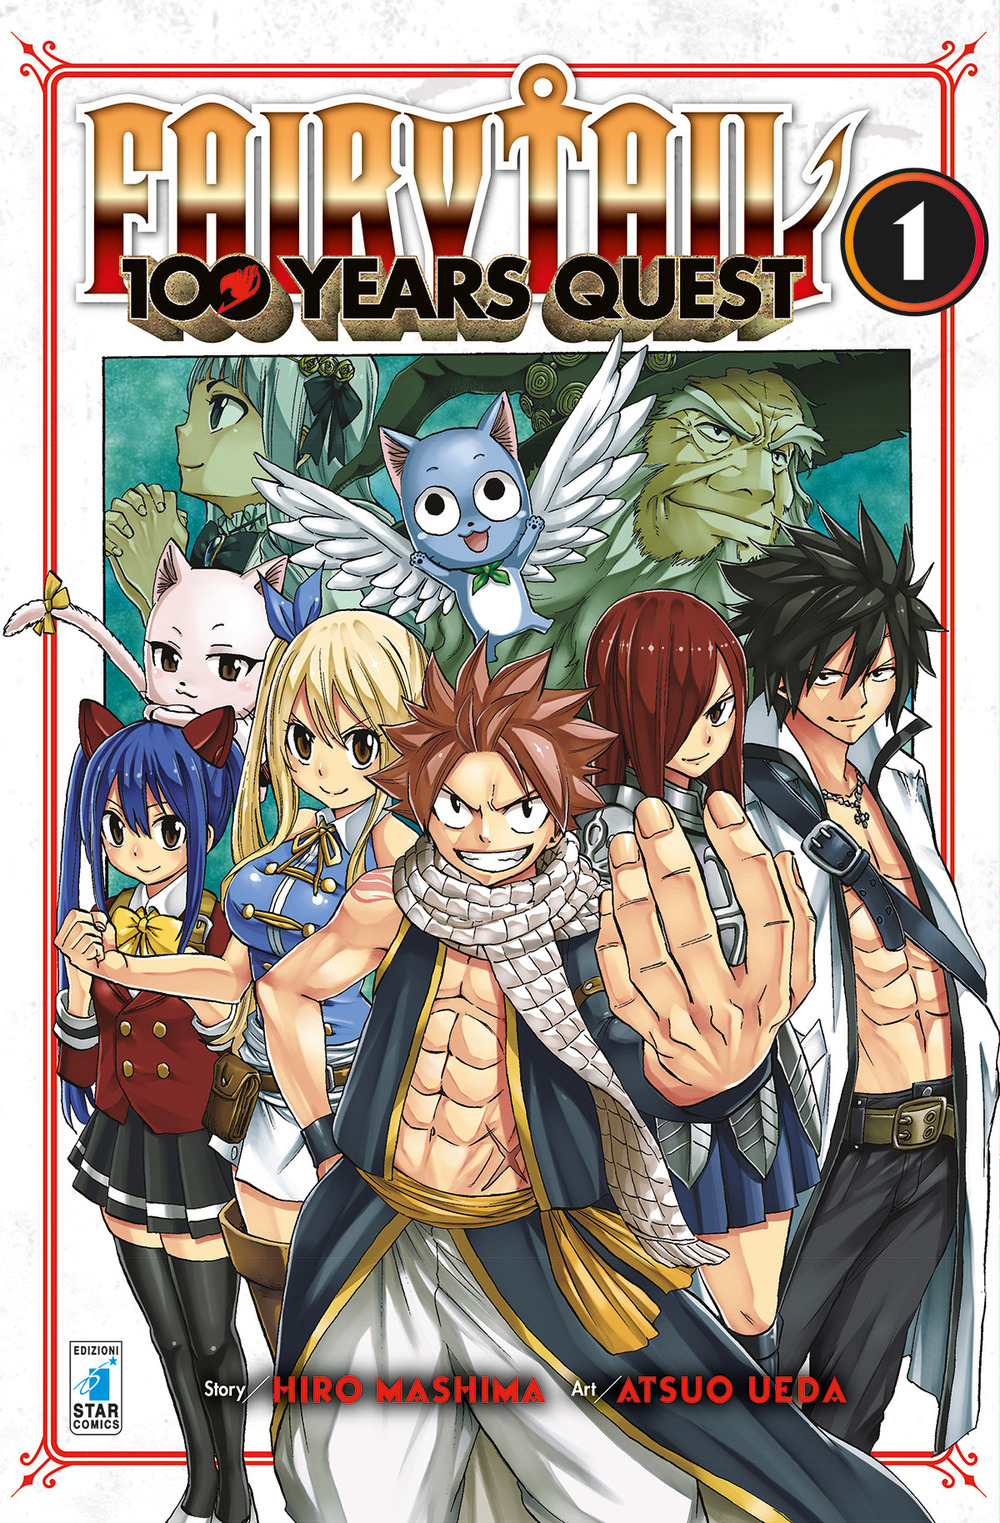 FAIRY TAIL 100 YEARS QUEST N. 1